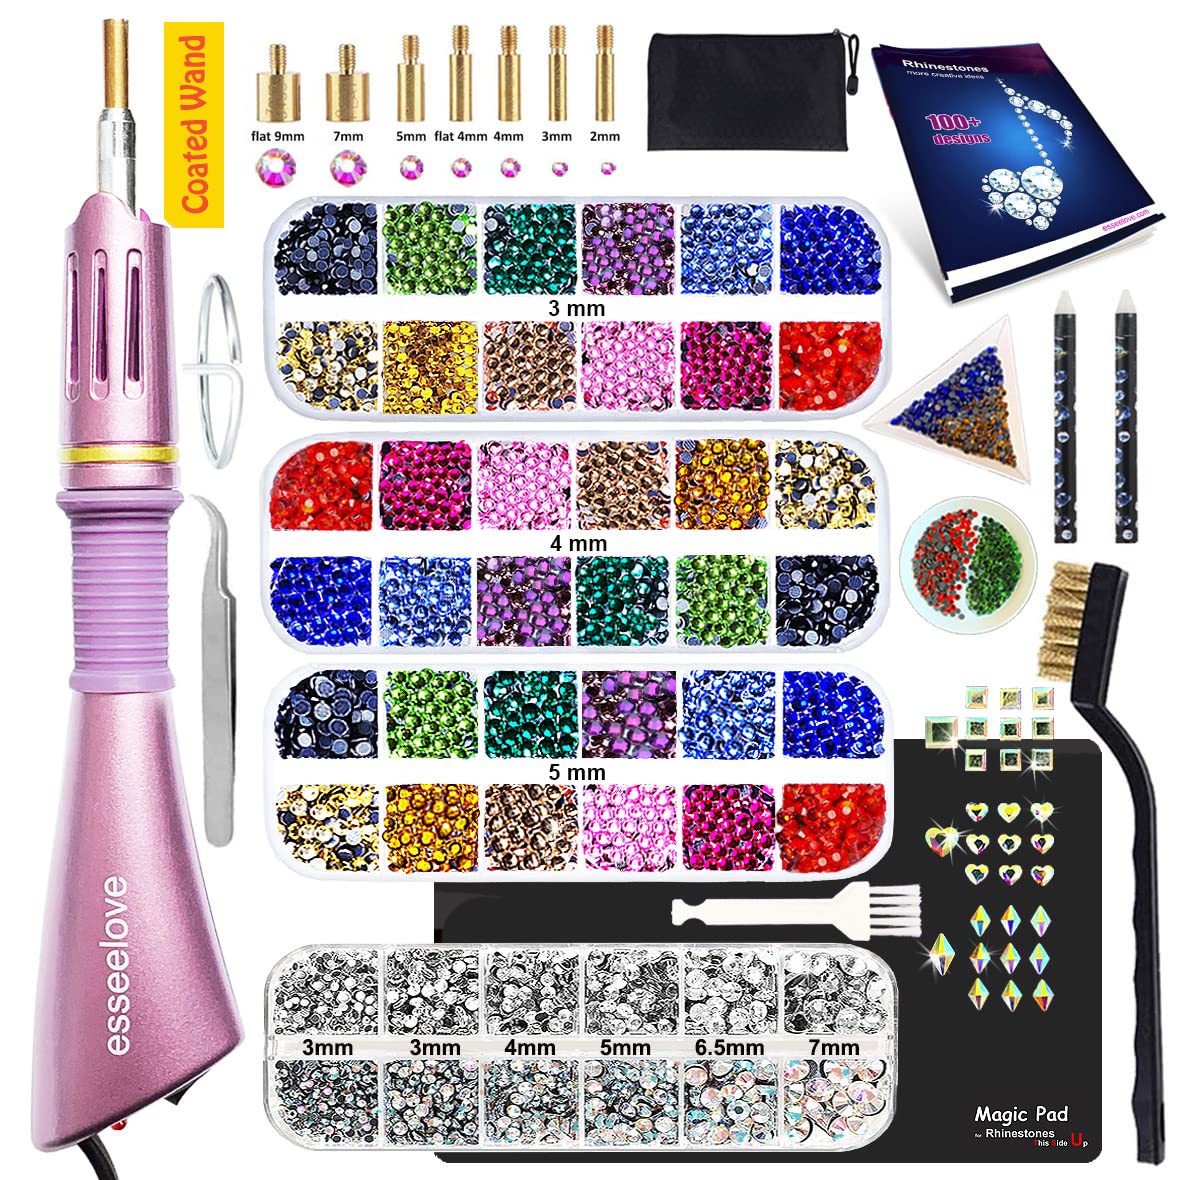 Hotfix Applicator, 7-in-1 Hot Fix Rhinestone Applicator Wand Setter Tool  Kit with 7 Tips, 2 Pencils and Tweezers : Arts, Crafts & Sewing 